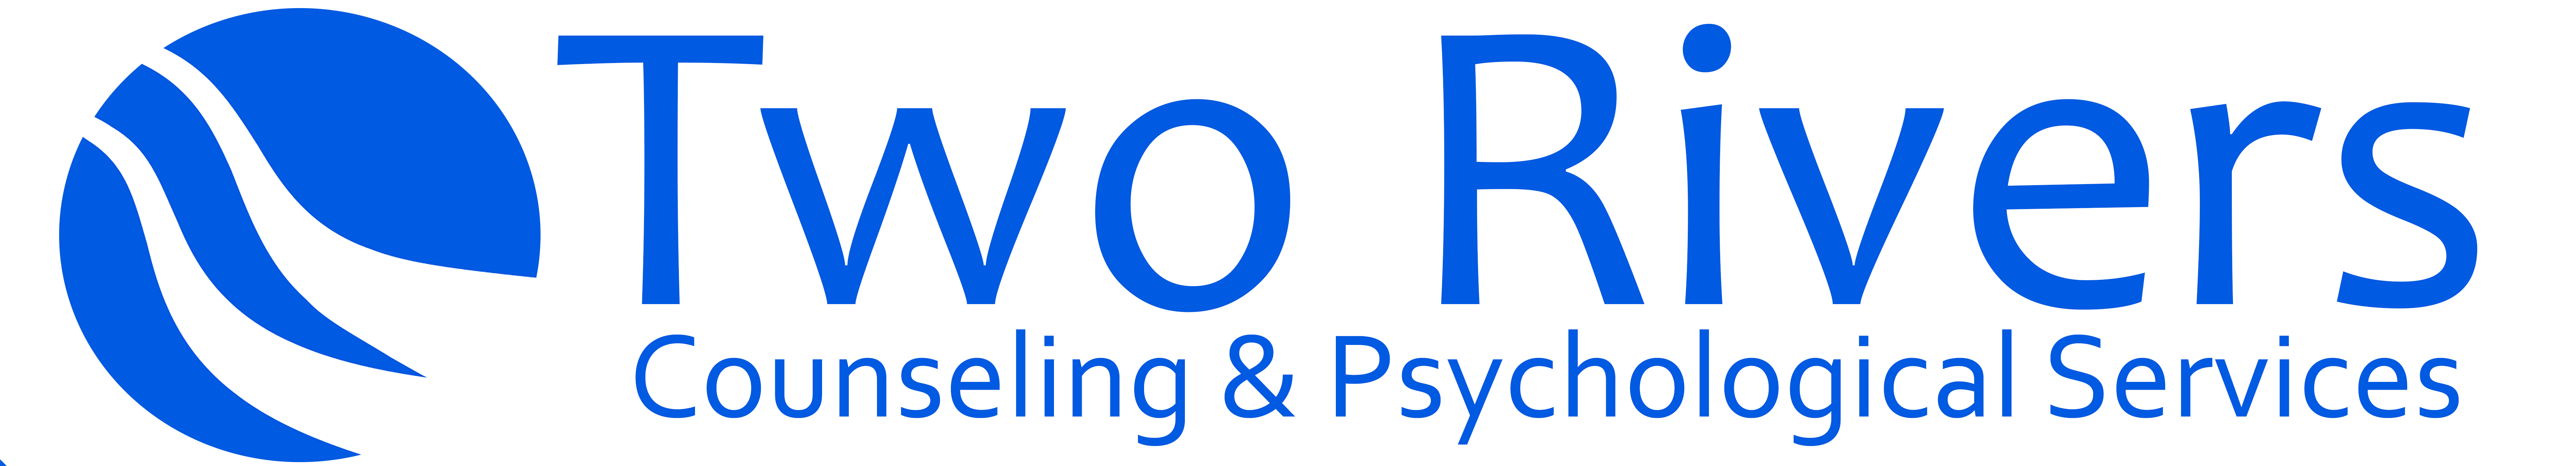 Two Rivers Counseling and Psychological, Hinesville GA